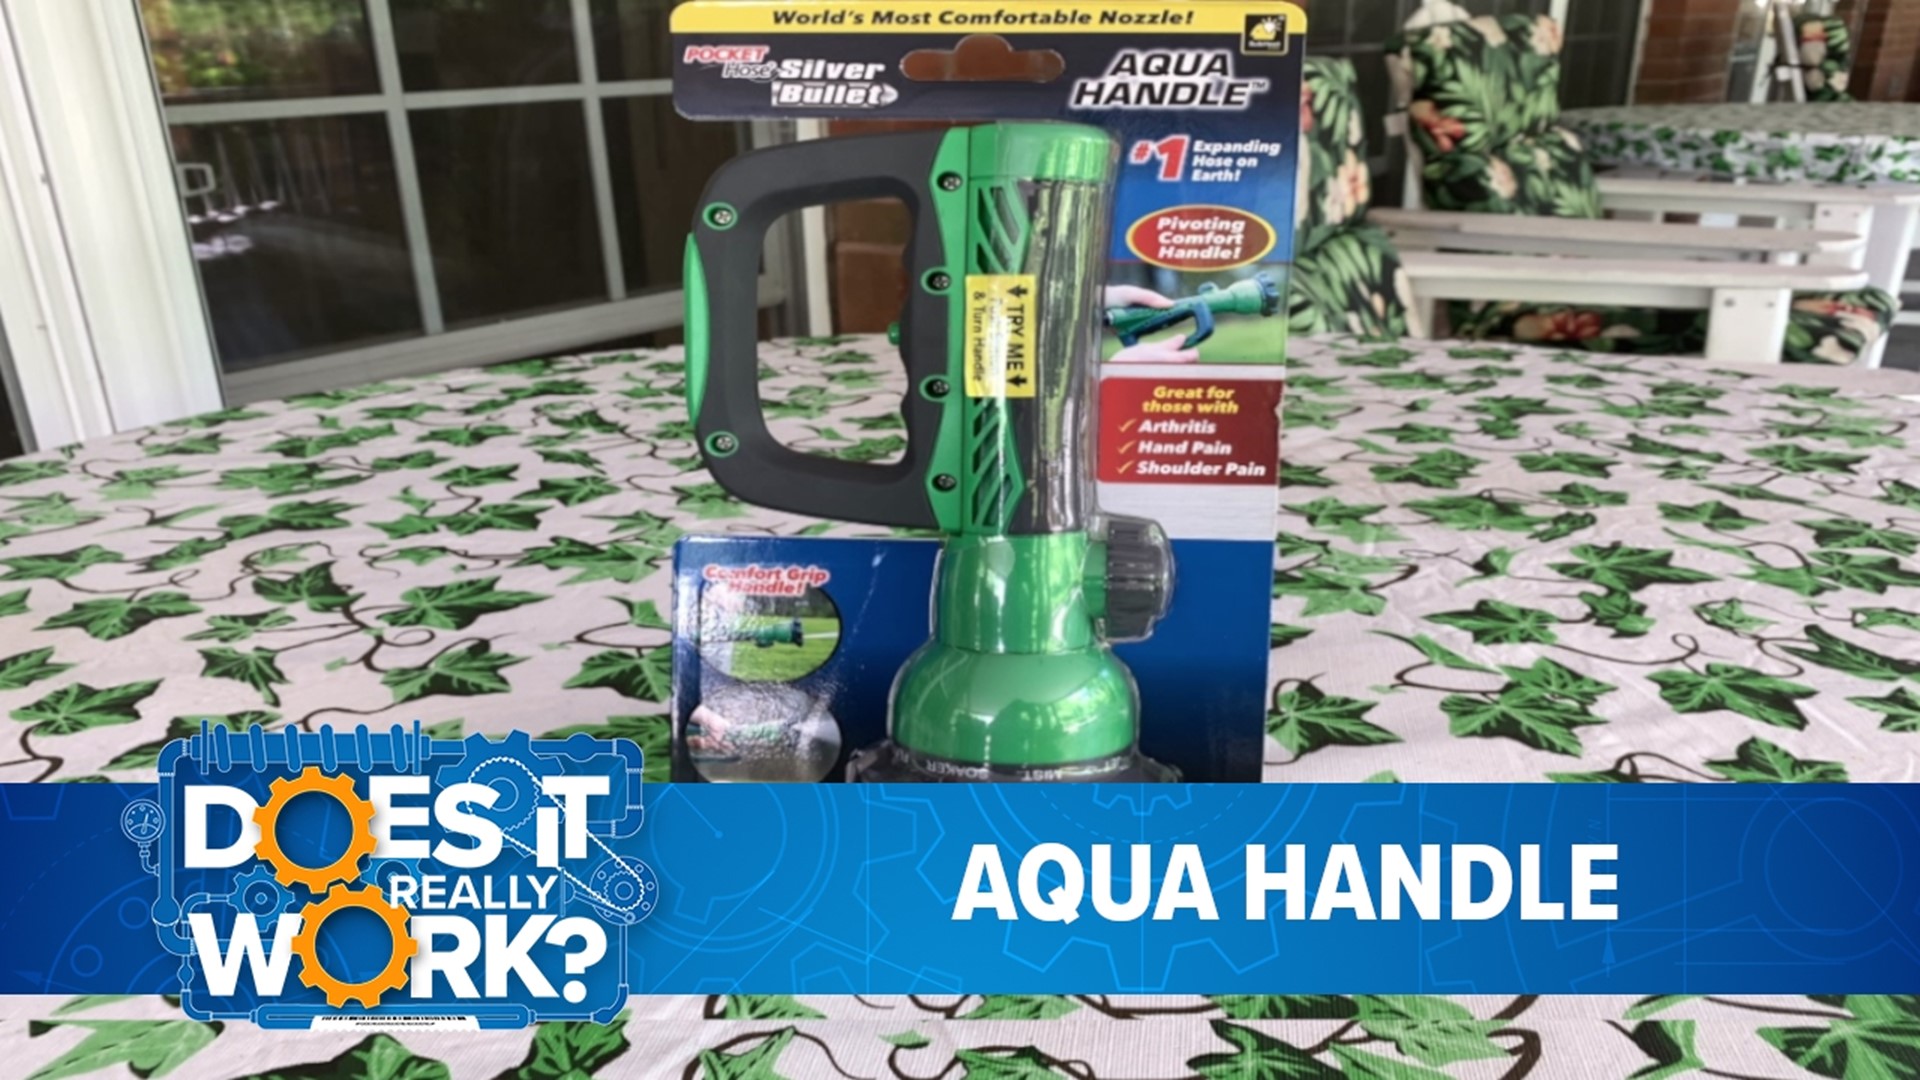 The maker claims it's the must-own hose nozzle for people suffering from arthritis, hand, wrist, or shoulder pain.